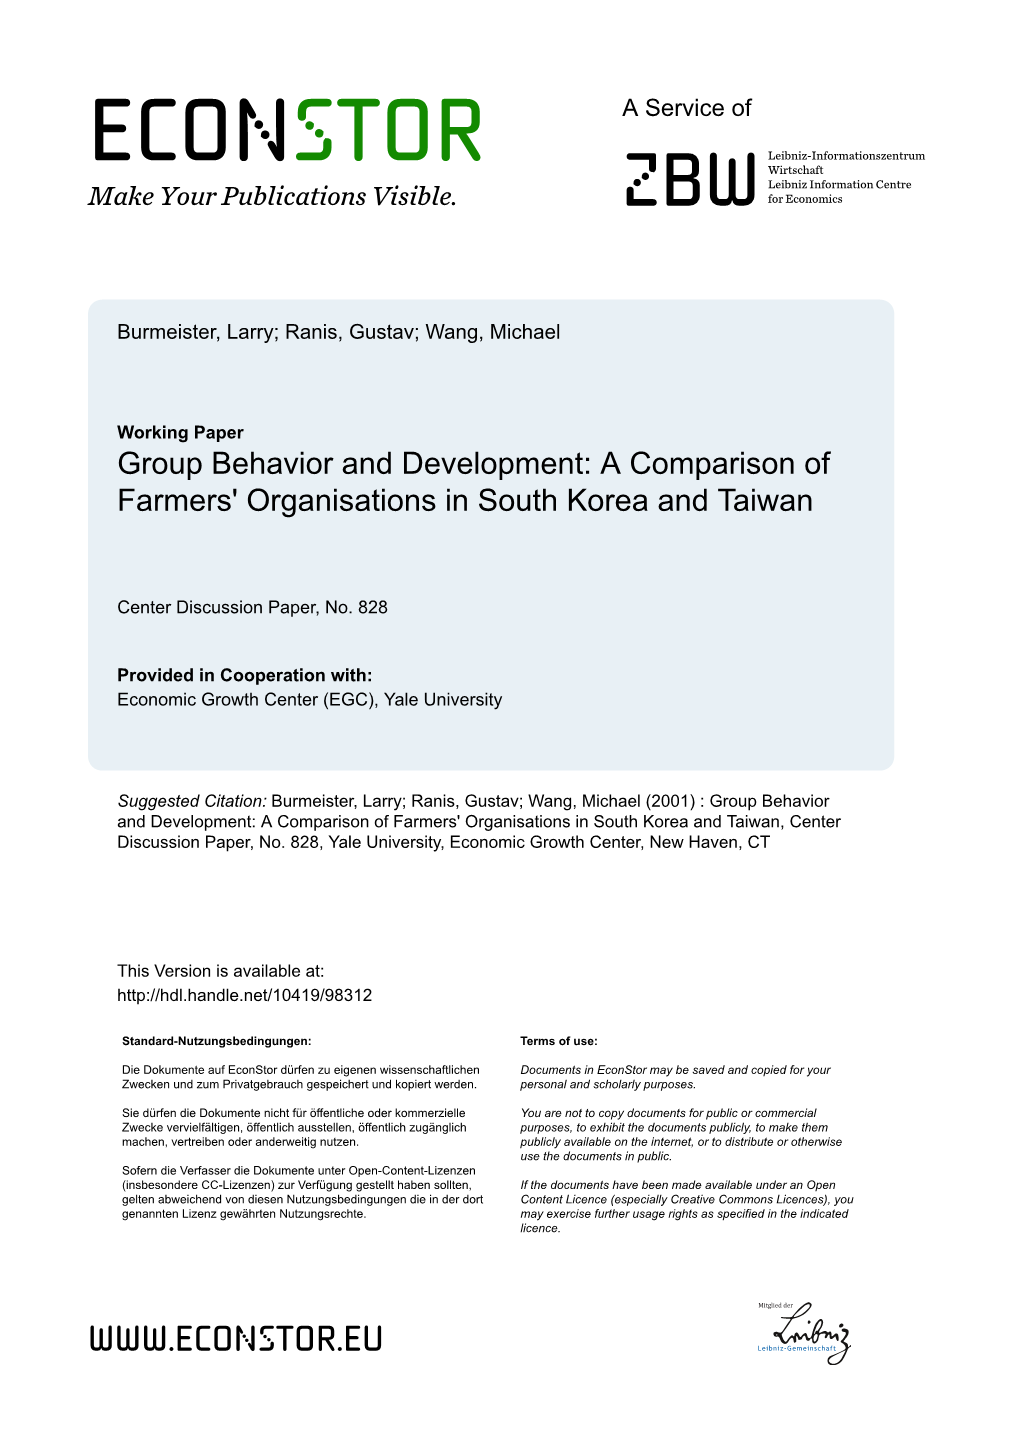 A Comparison of Farmers' Organisations in South Korea and Taiwan